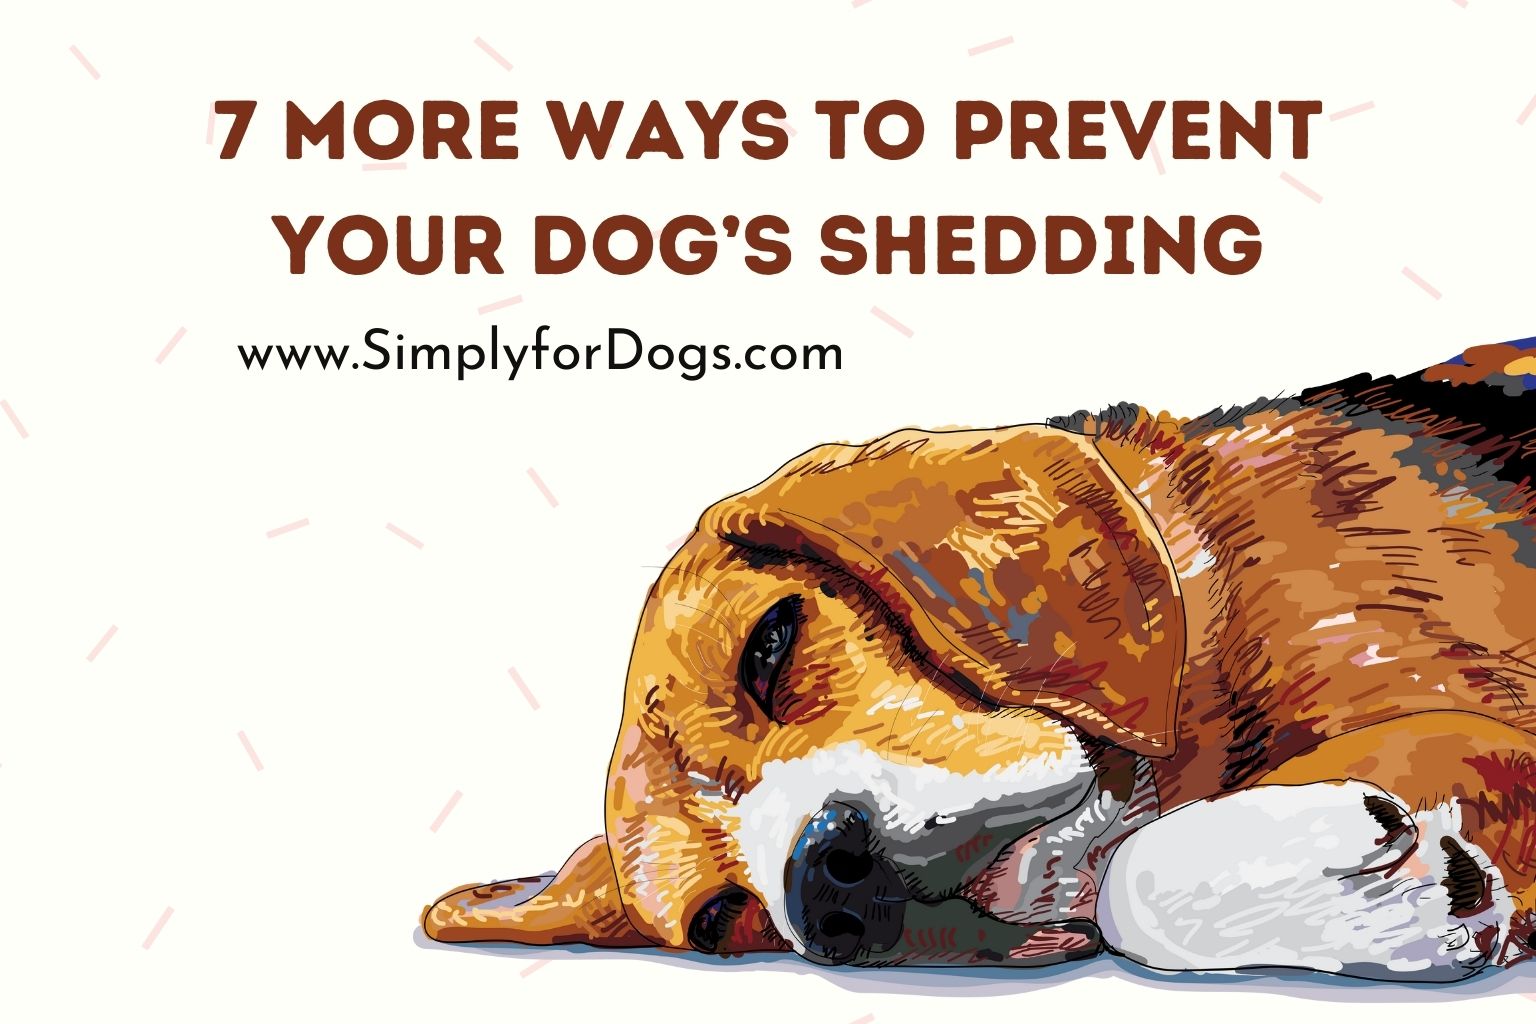 7 More Ways to Prevent Your Dog’s Shedding